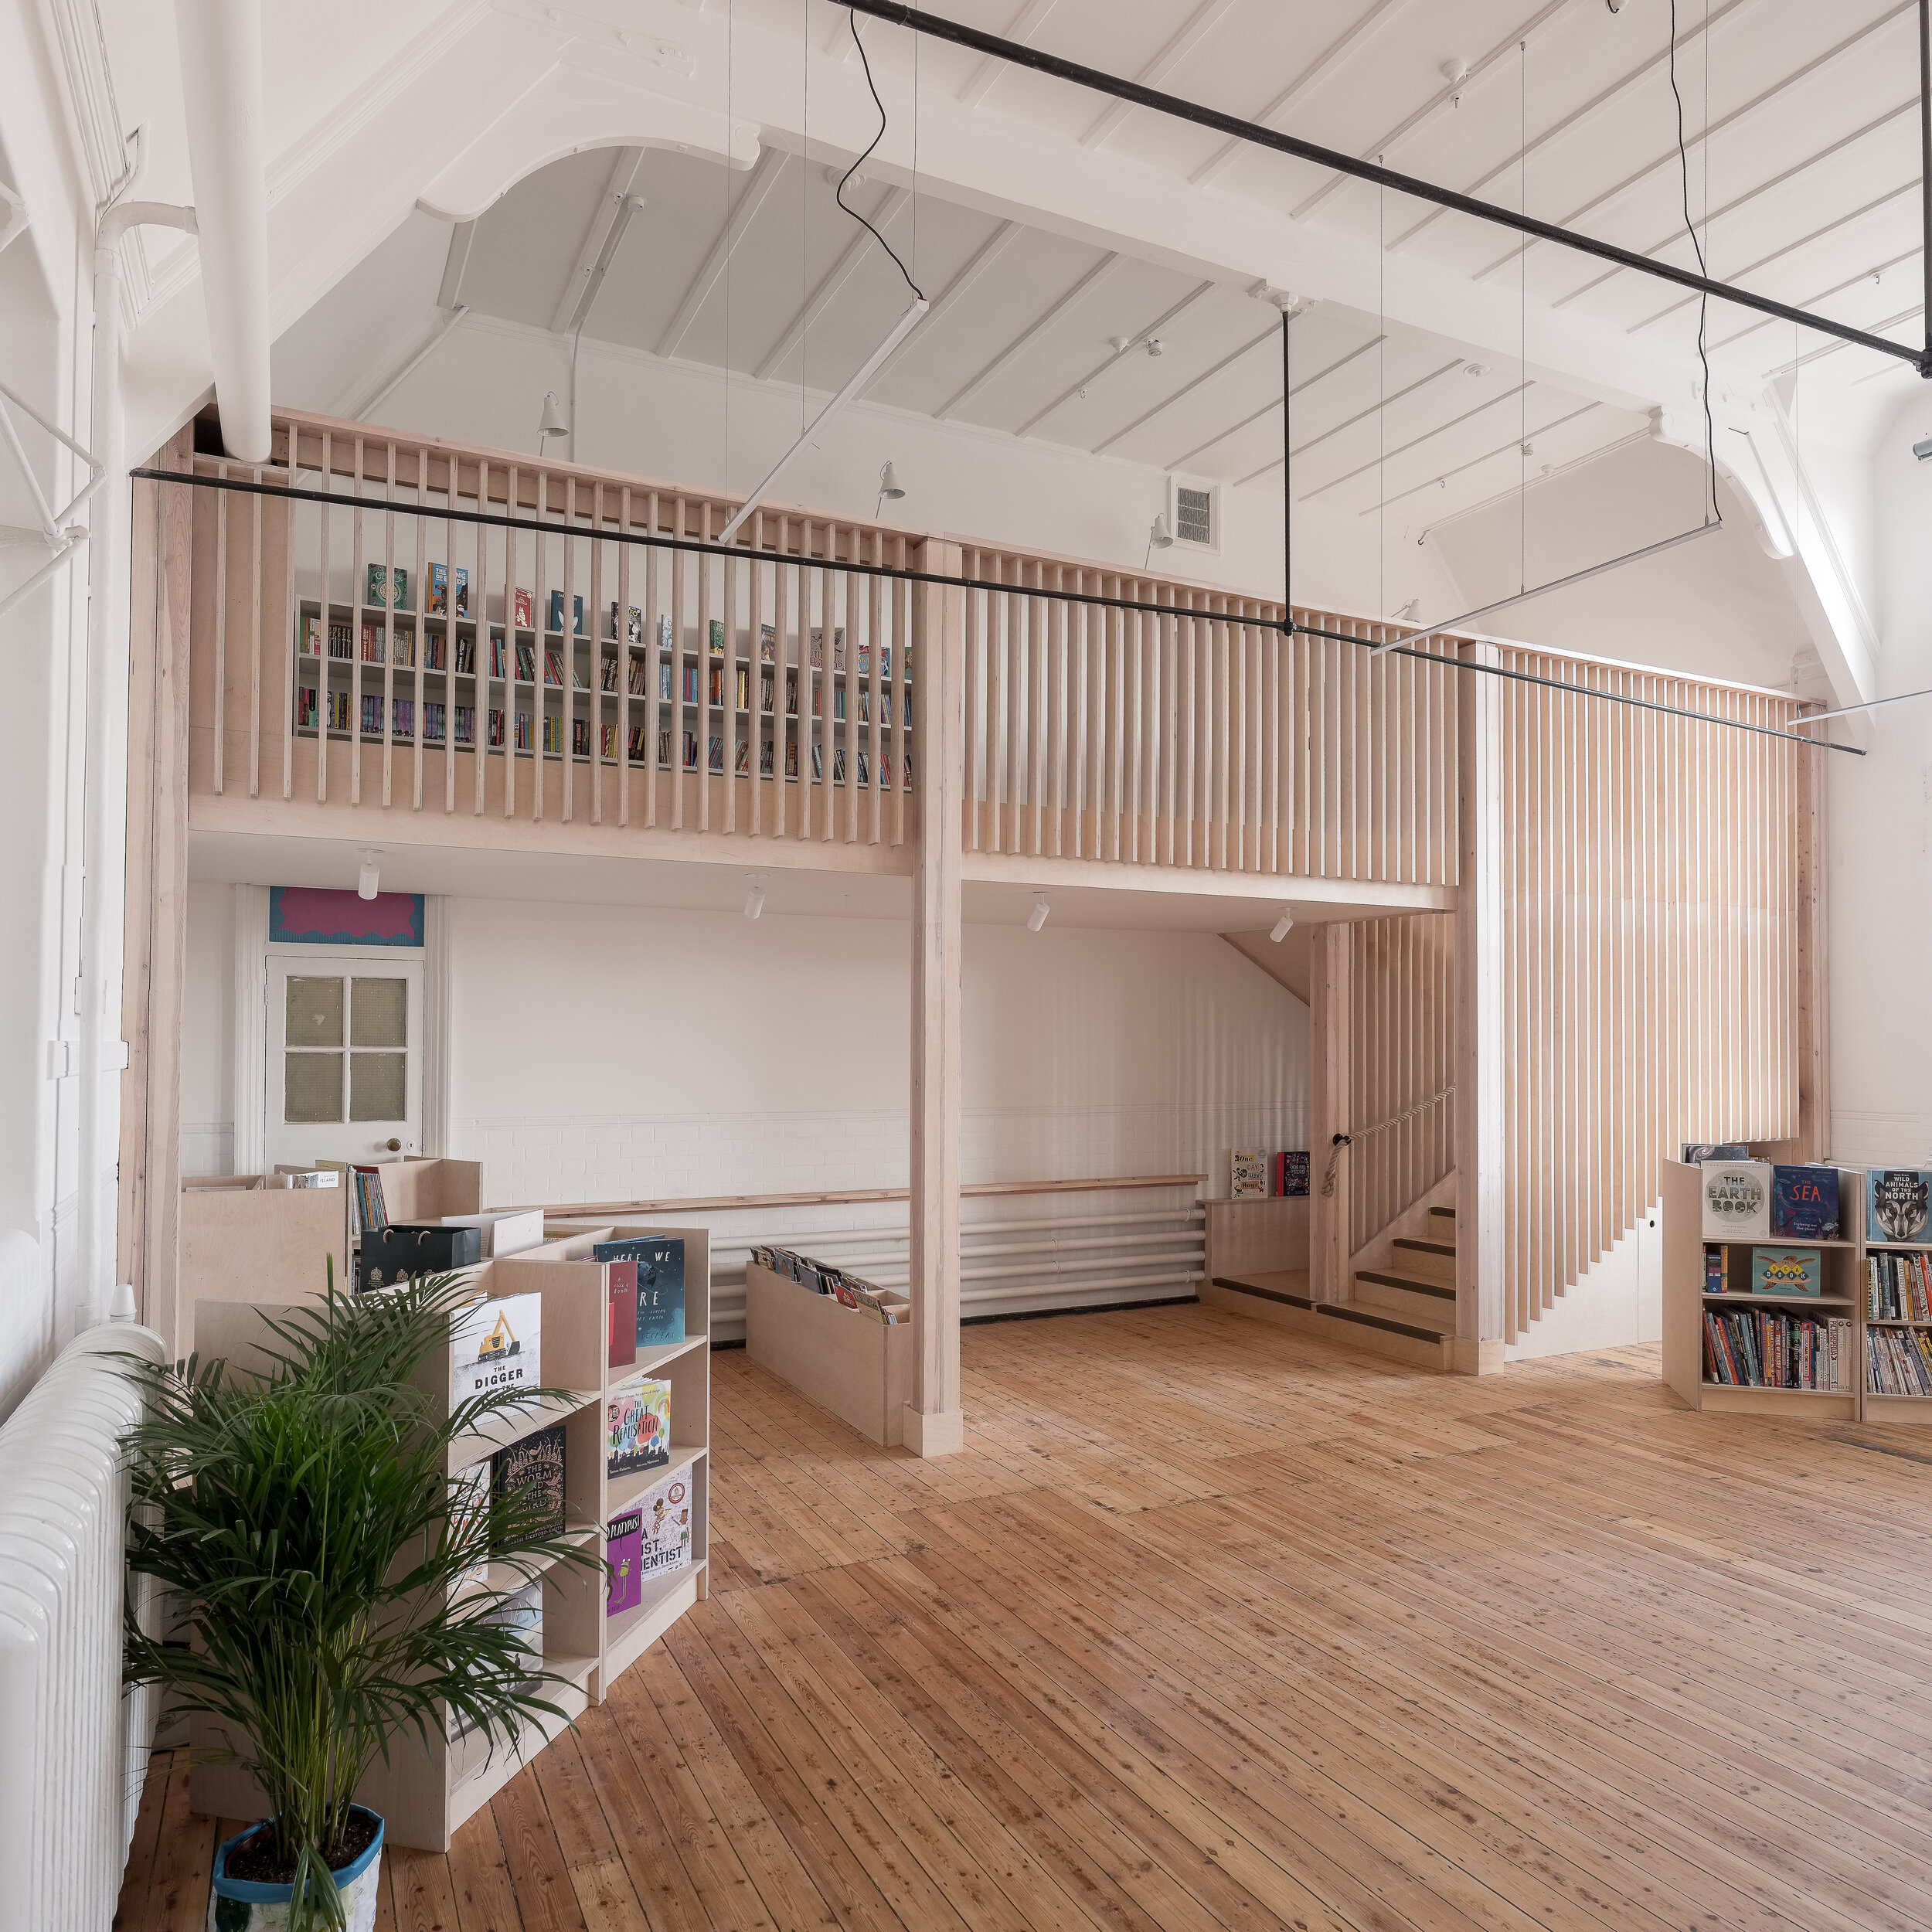 Fred+Howarth+Photography_Ivydale+Library_02.jpg